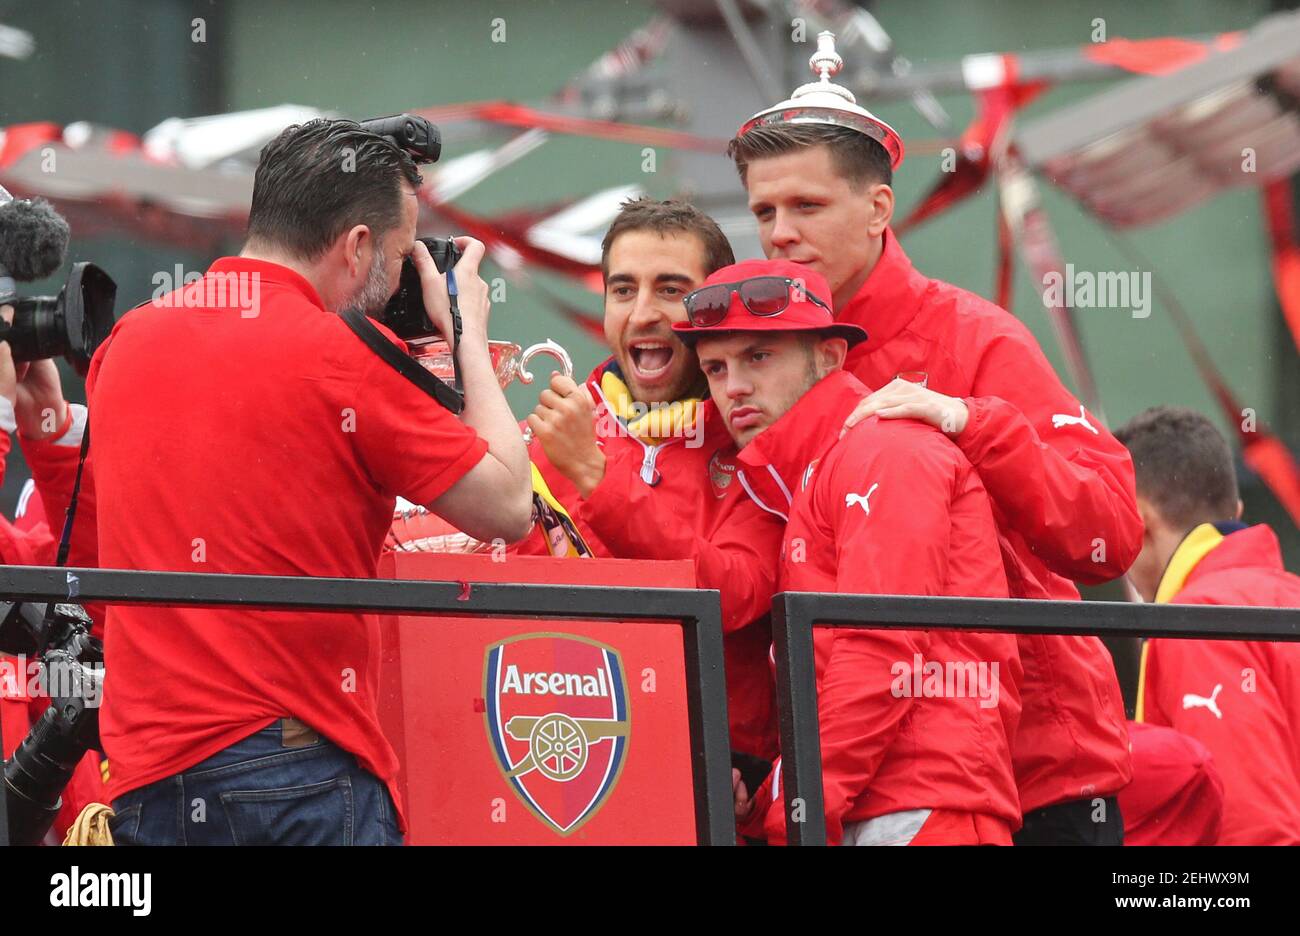 Football - Arsenal - FA Cup Winners Parade - Emirates Stadium - 31/5/15 Arsenal's Mathieu Flamini, Wojciech Szczesny and Jack Wilshere pose for a photo during the parade Action Images via Reuters / Alex Morton Livepic Stock Photo